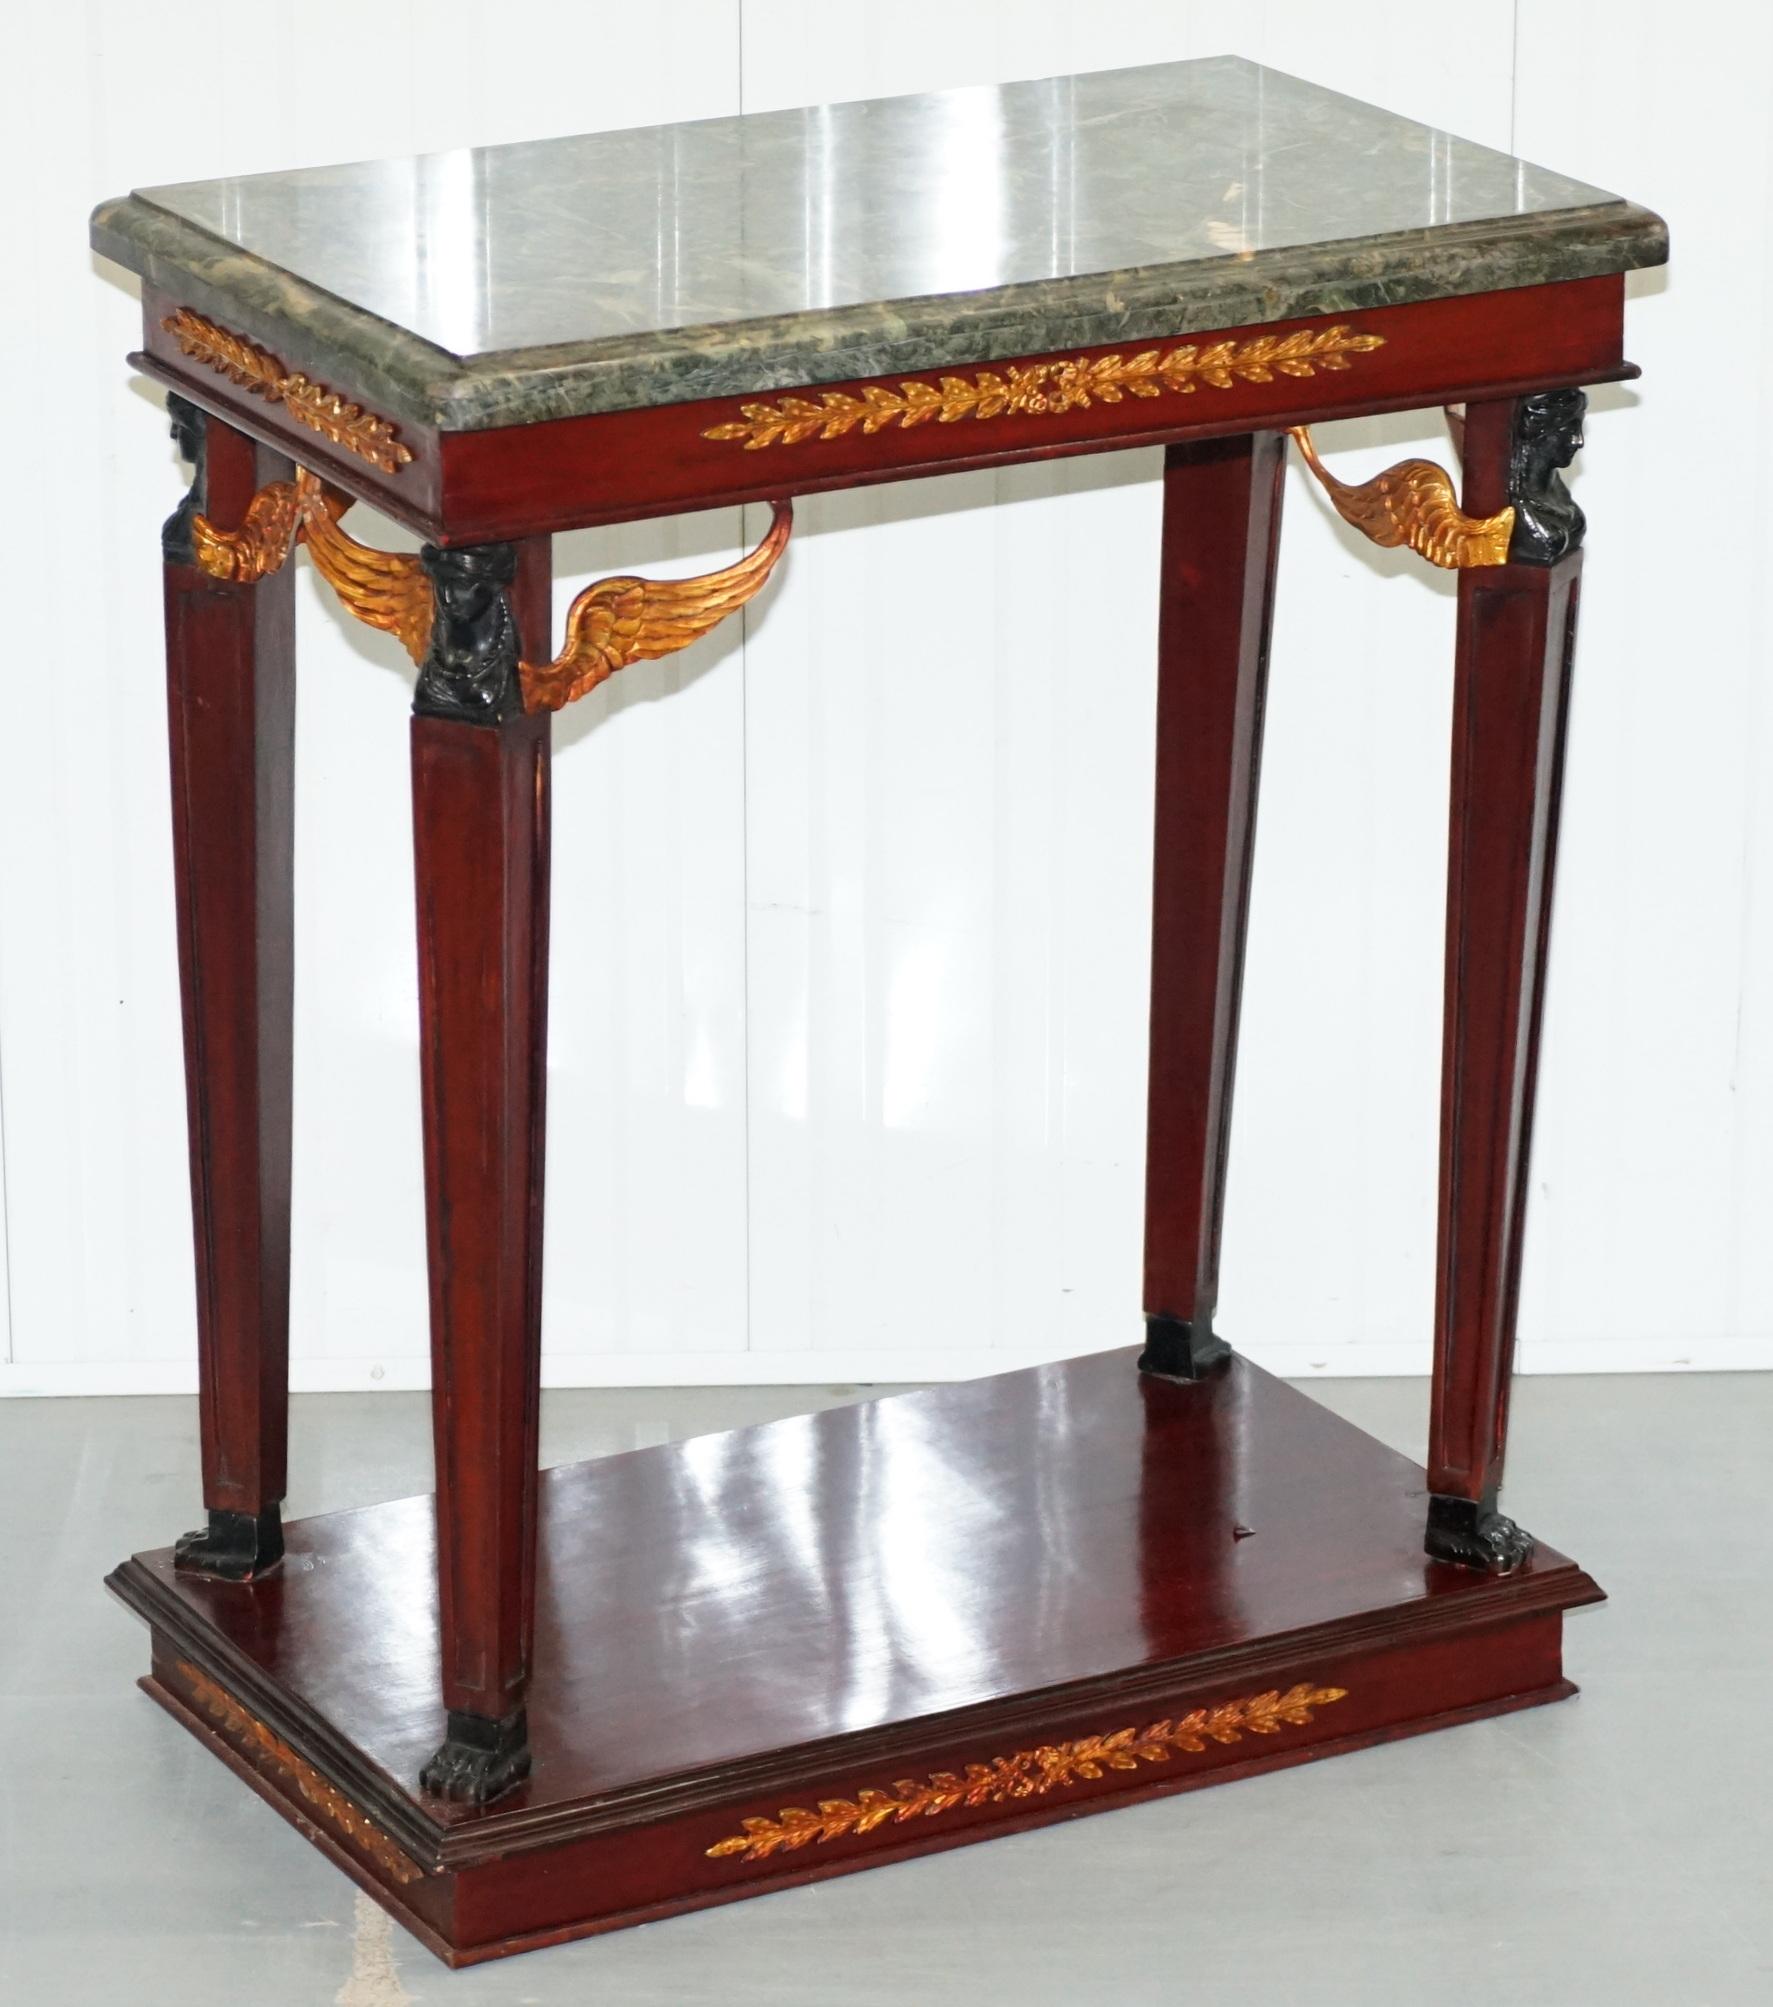 We are delighted to offer for sale this pair of vintage French Empire style thick marble topped console tables

A very good looking and decorative pair, the marble tops are removable and very solid, I would estimate them to weigh around 50kgs